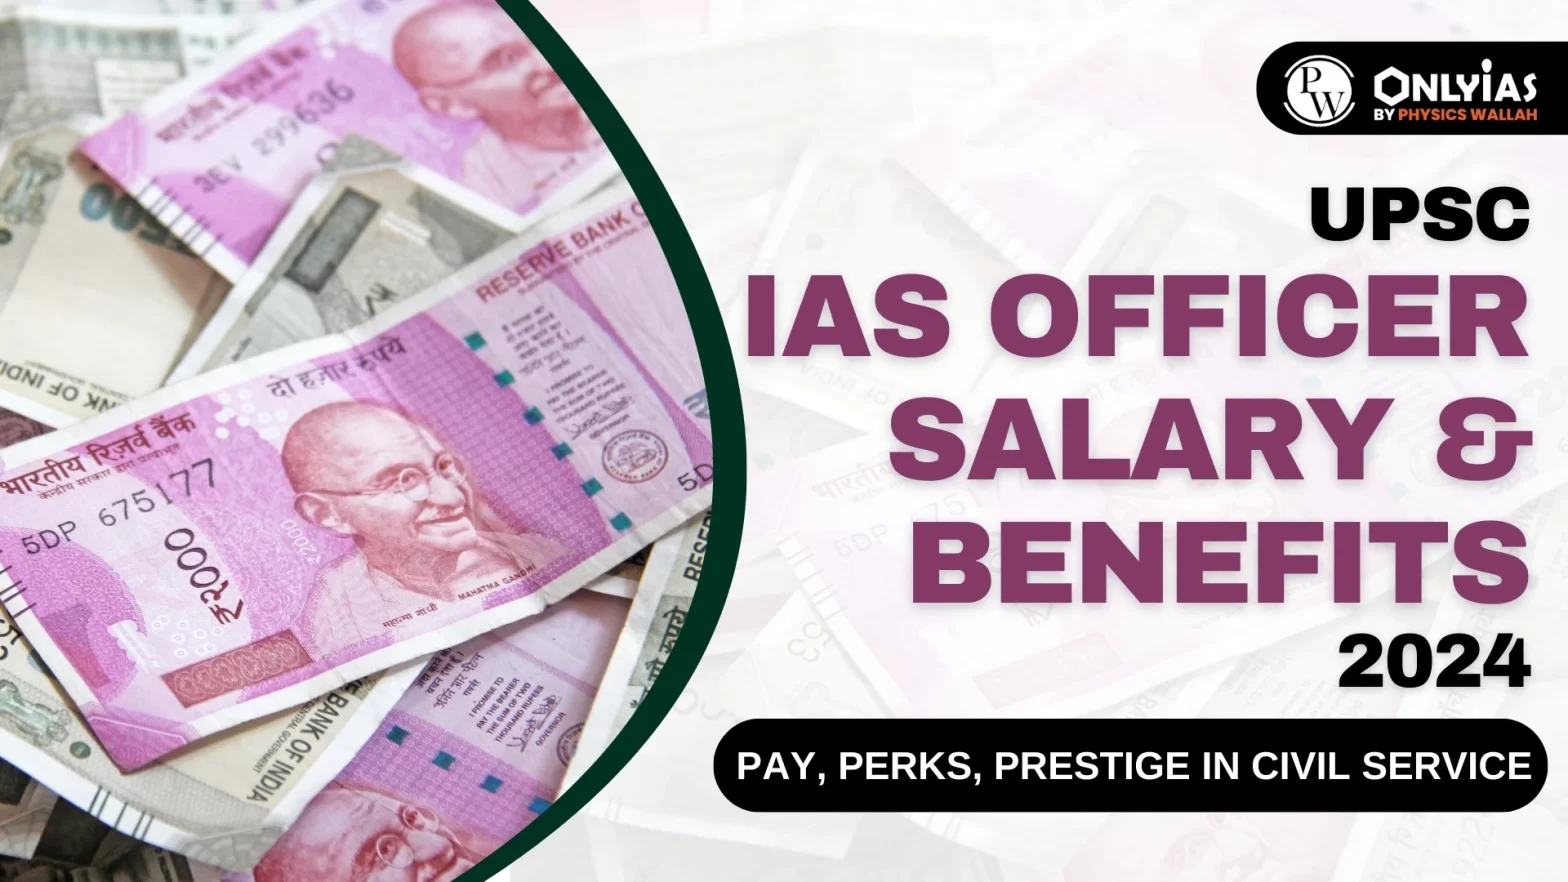 UPSC IAS Officer Salary & Benefits 2024: Pay, Perks, Prestige in Civil Service